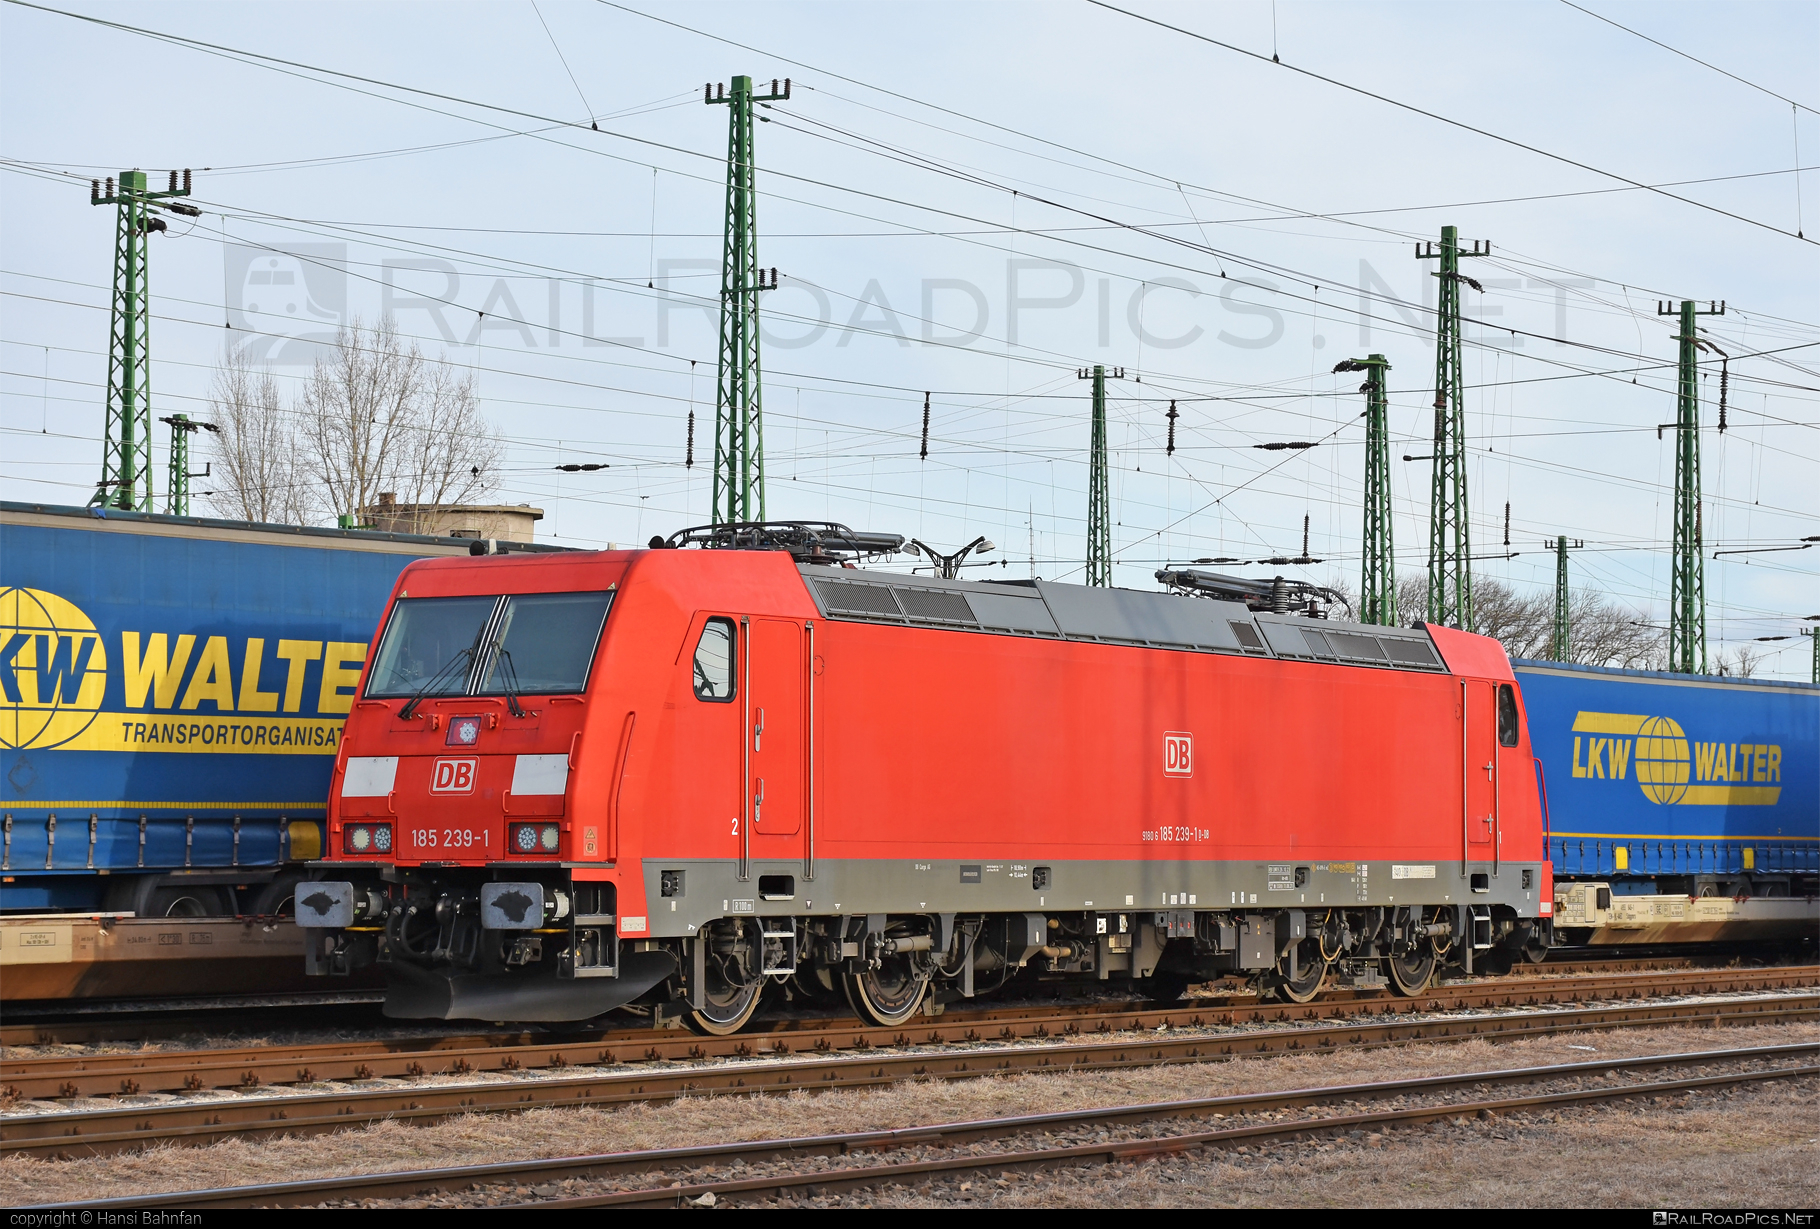 Bombardier TRAXX F140 AC2 - 185 239-1 operated by DB Cargo AG #bombardier #bombardiertraxx #db #dbcargo #dbcargoag #deutschebahn #traxx #traxxf140 #traxxf140ac #traxxf140ac2